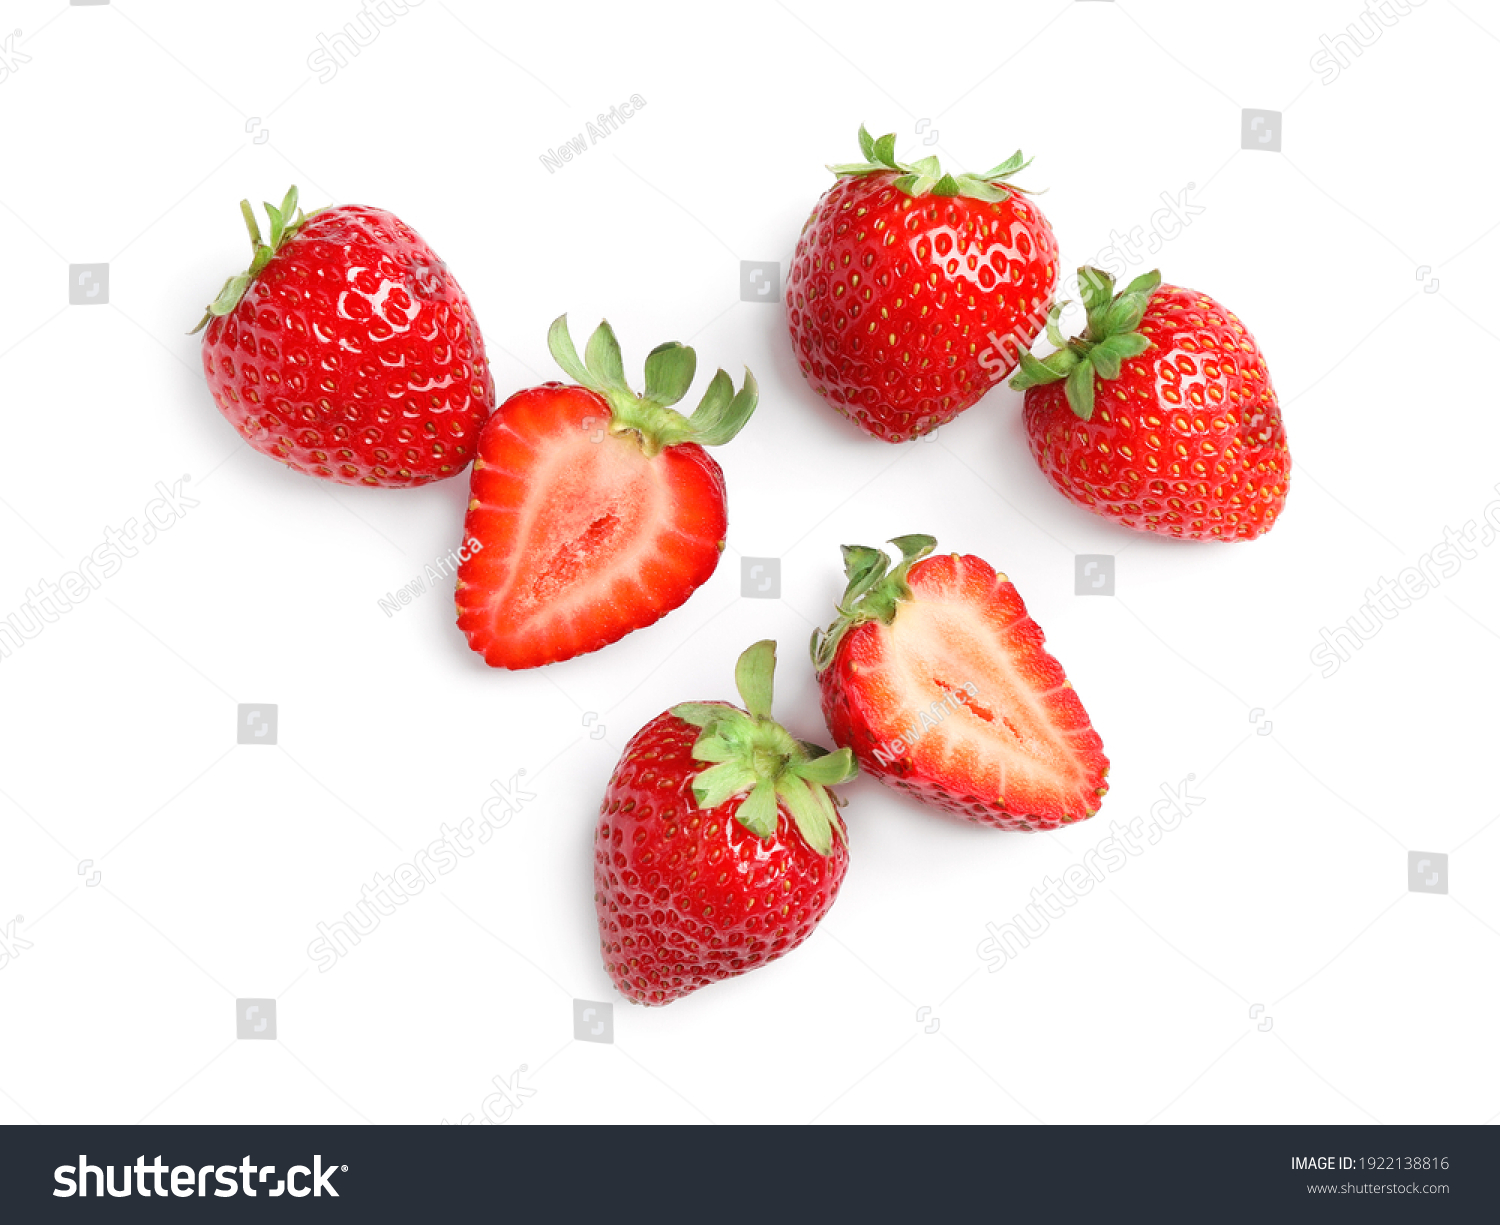 Delicious fresh red strawberries on white background, top view #1922138816